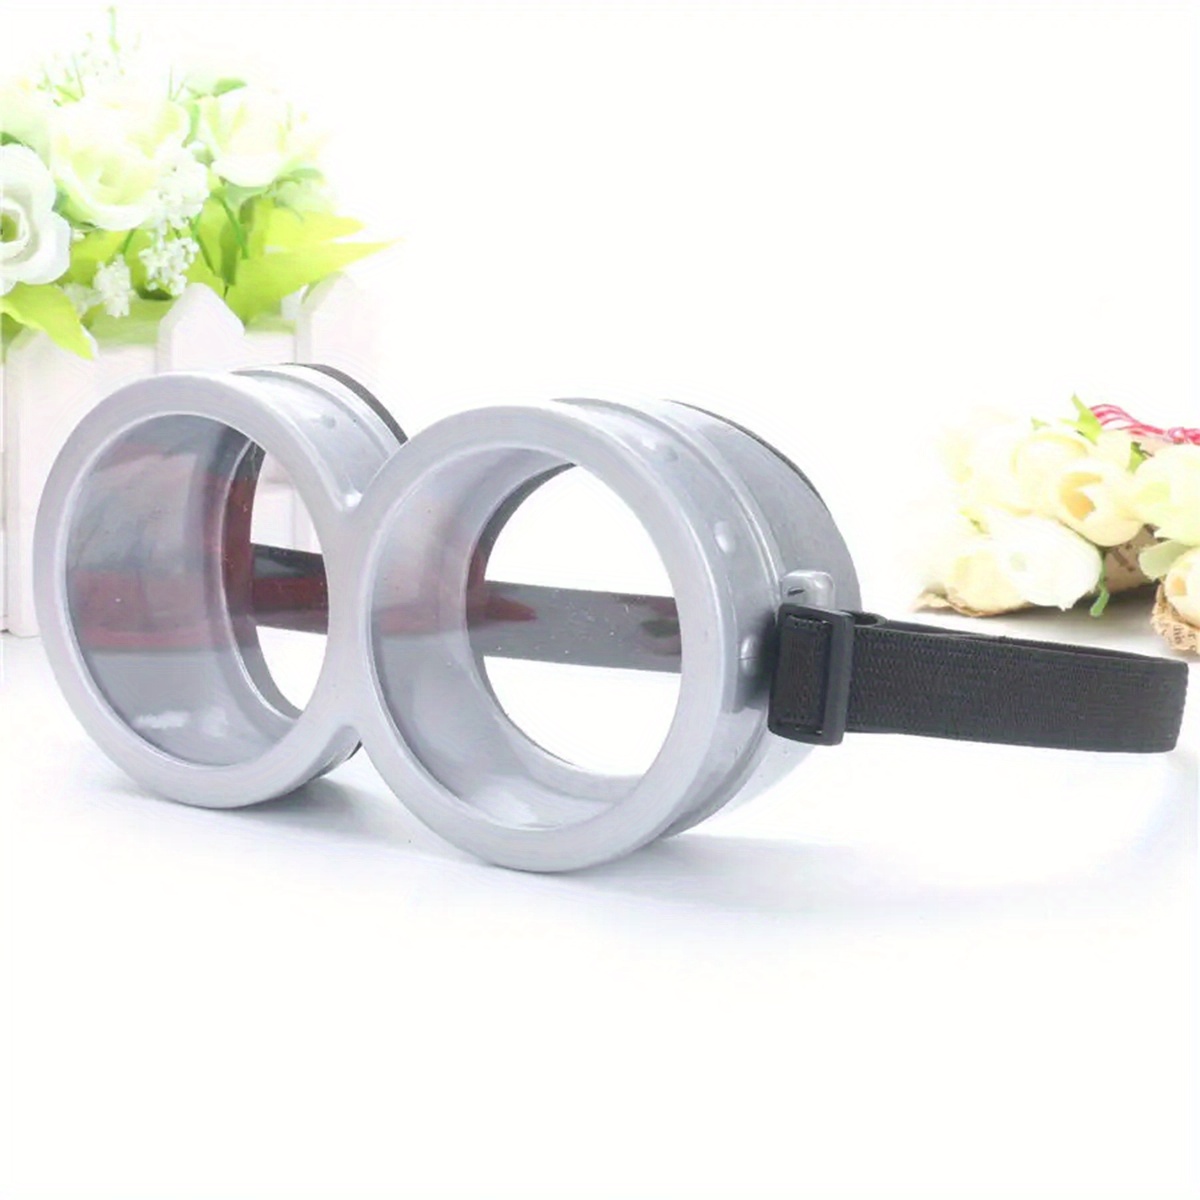 

1pc, Funny Decoration 3d Round Glasses Party Supplies Weird Stuff, Costume Accessories